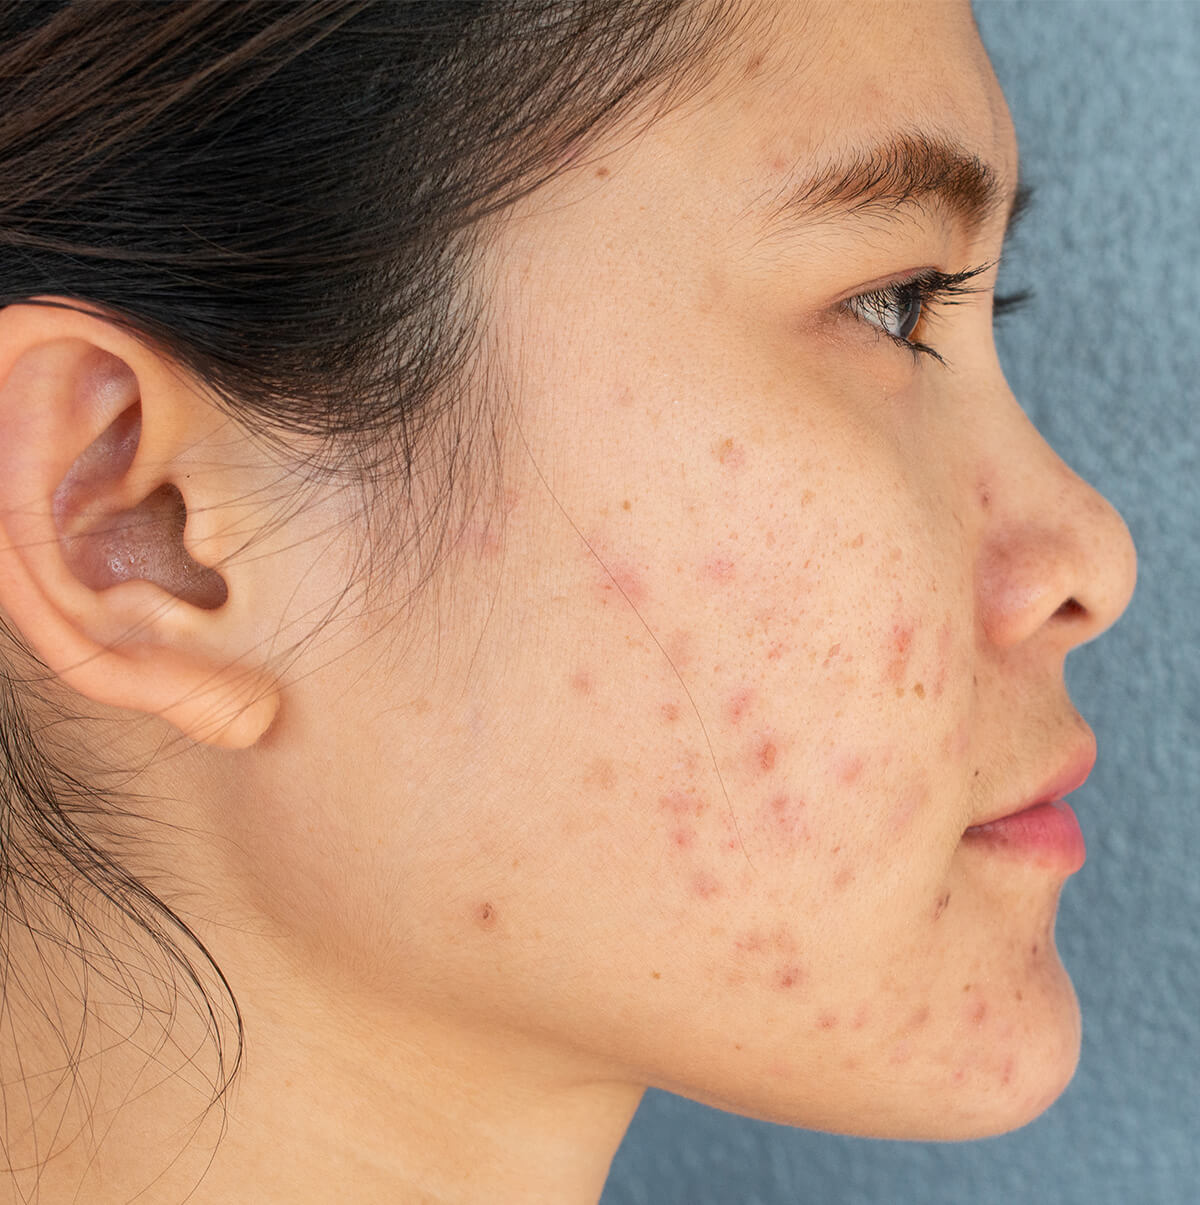 Acne Treatment In Singapore Dermatologist Dr Wong Soon Tee